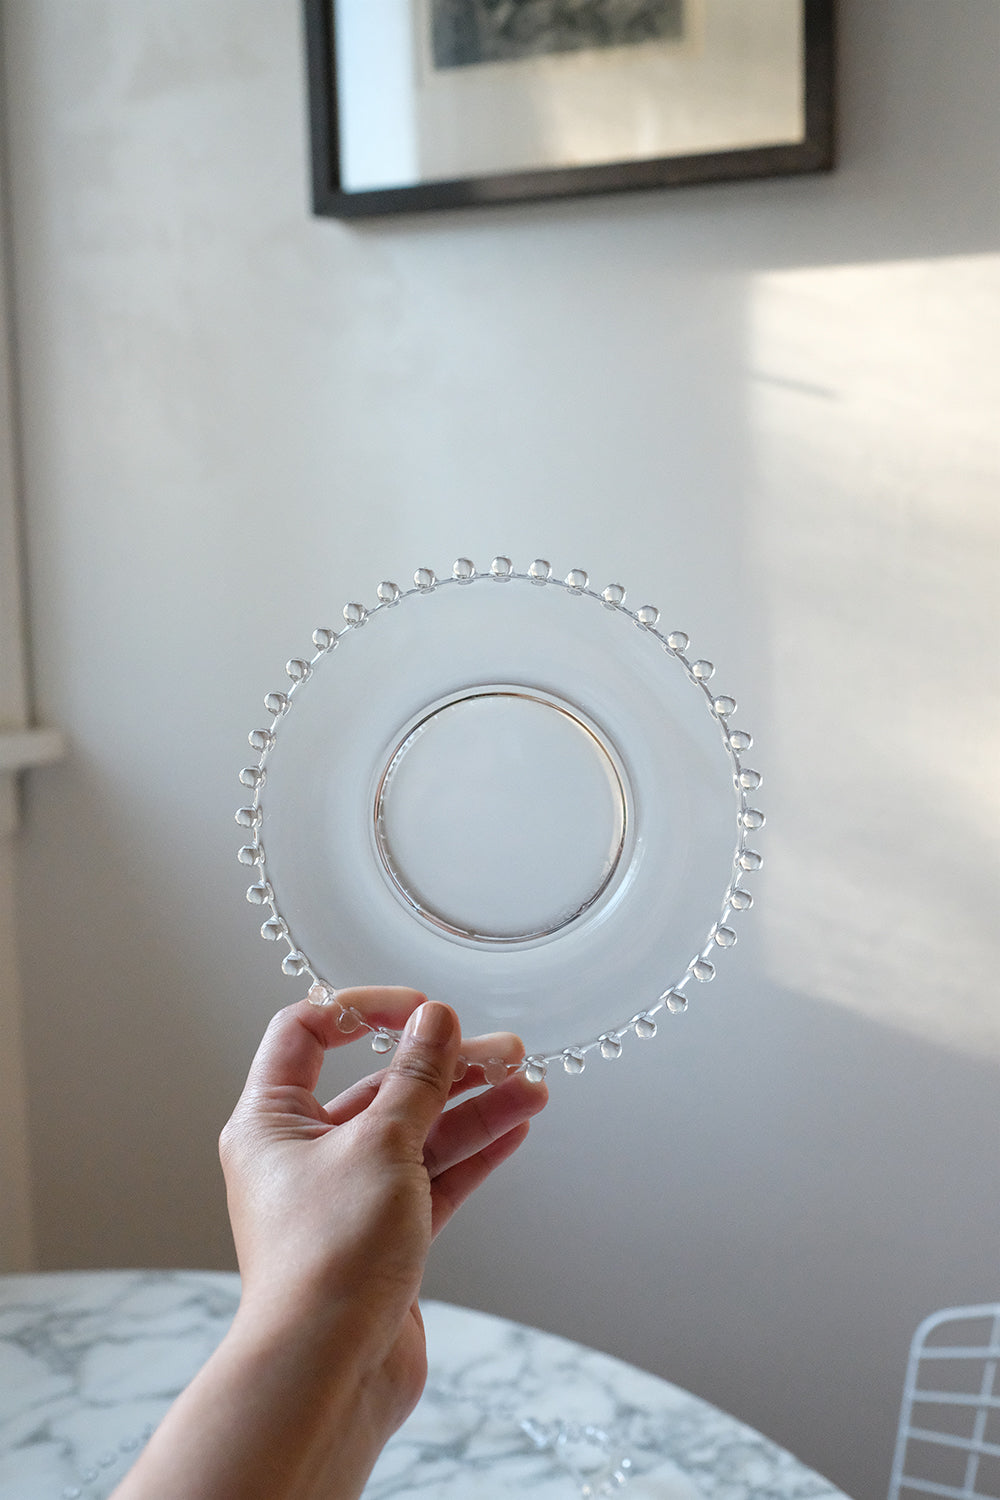 small glass plates - set of 6